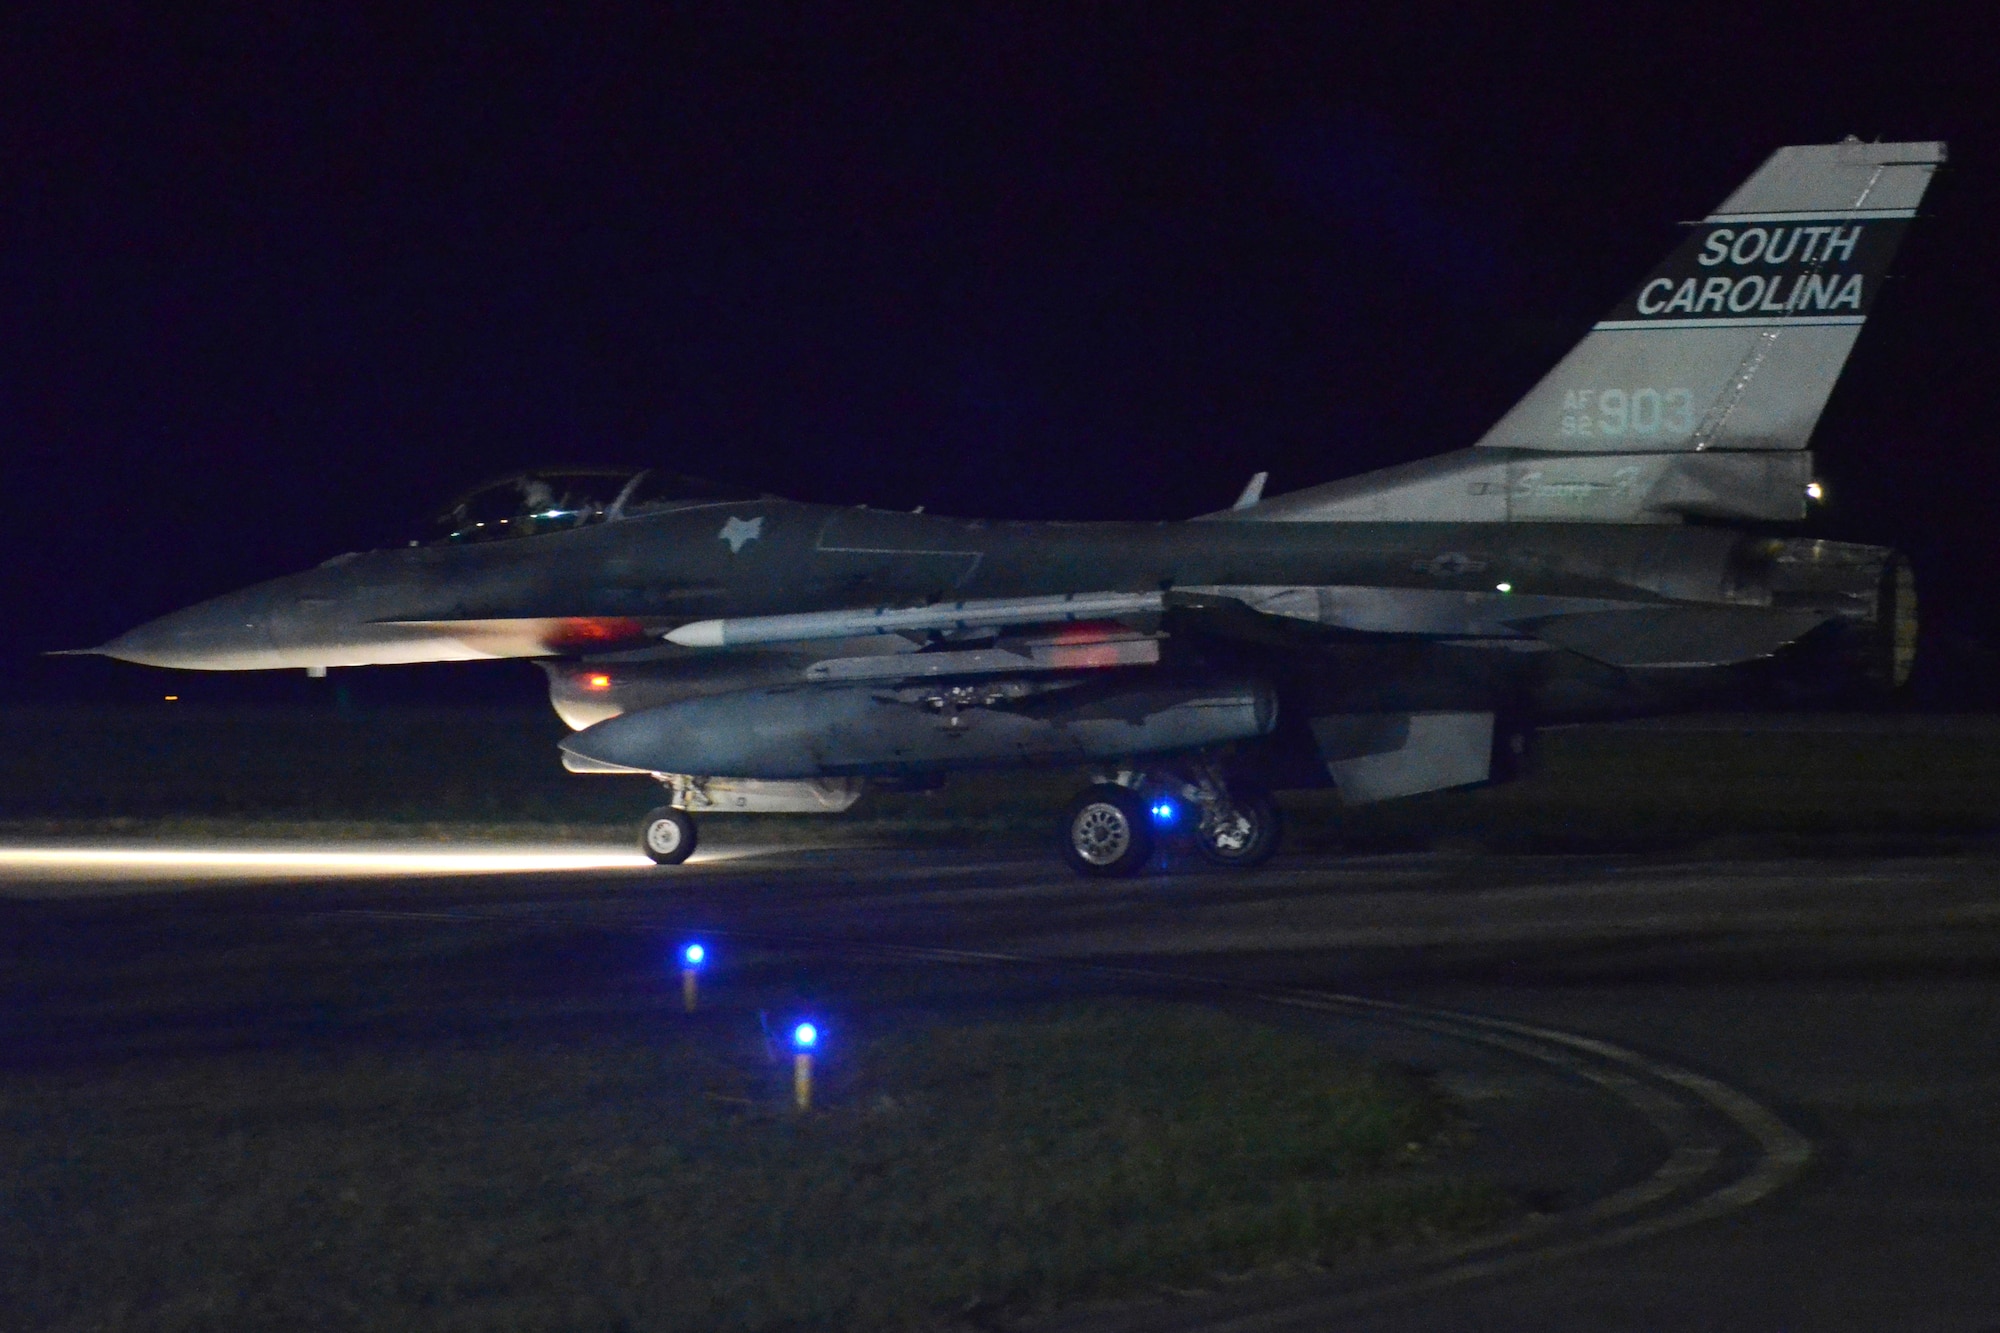 U.S. Air Force F-16 Fighting Falcon jets, assigned to the South Carolina Air National Guard’s 169th Fighter Wing, prepare to depart McEntire Joint National Guard Base, South Carolina, to support an Air Expeditionary Force deployment to Prince Sultan Air Base Saudi Arabia, April 12, 2021. The 169th Fighter Wing will support U.S. Central Command (CENTCOM) by preserving operational depth, staging joint forces and projecting overwhelming combat power in the region. This is the wing’s largest deployment since the summer of 2018 when they supported an Air Expeditionary Force rotation to Kuwait. (U.S. Air National Guard photo by Lt. Col. Jim St.Clair, 169th Fighter Wing Public Affairs)